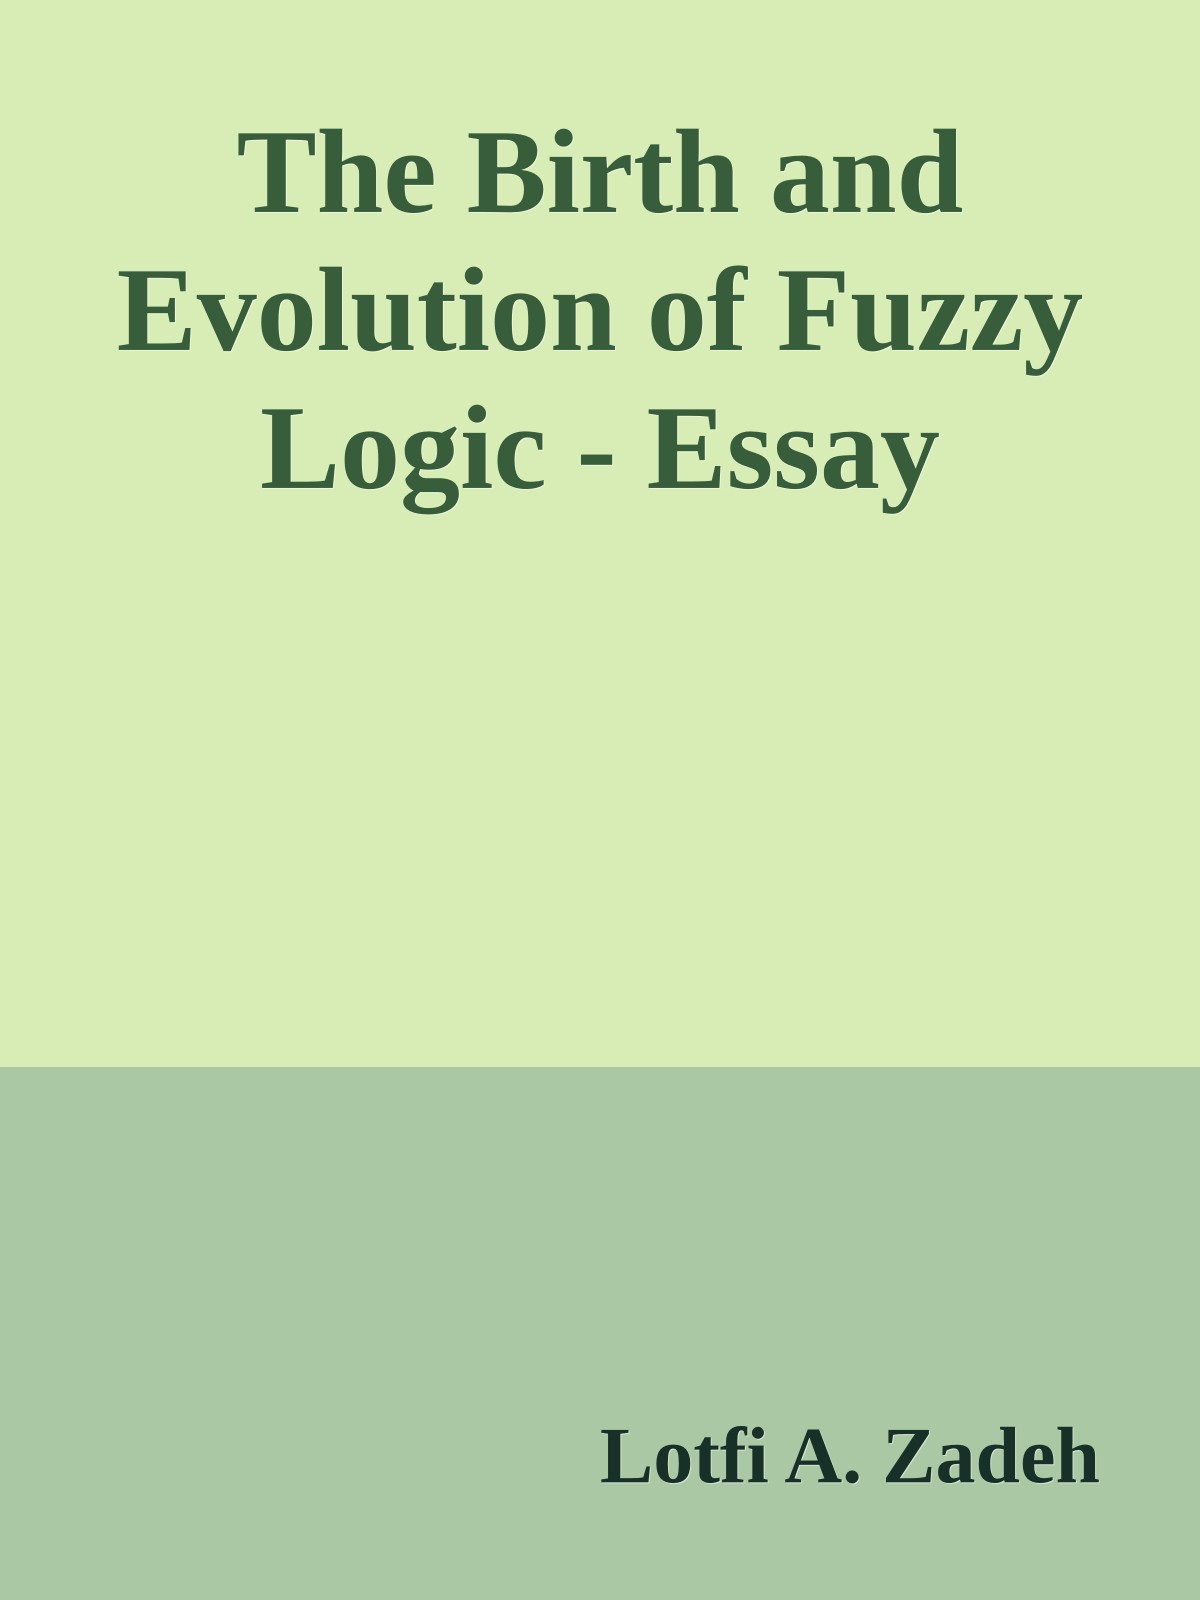 The Birth and Evolution of Fuzzy Logic - Essay